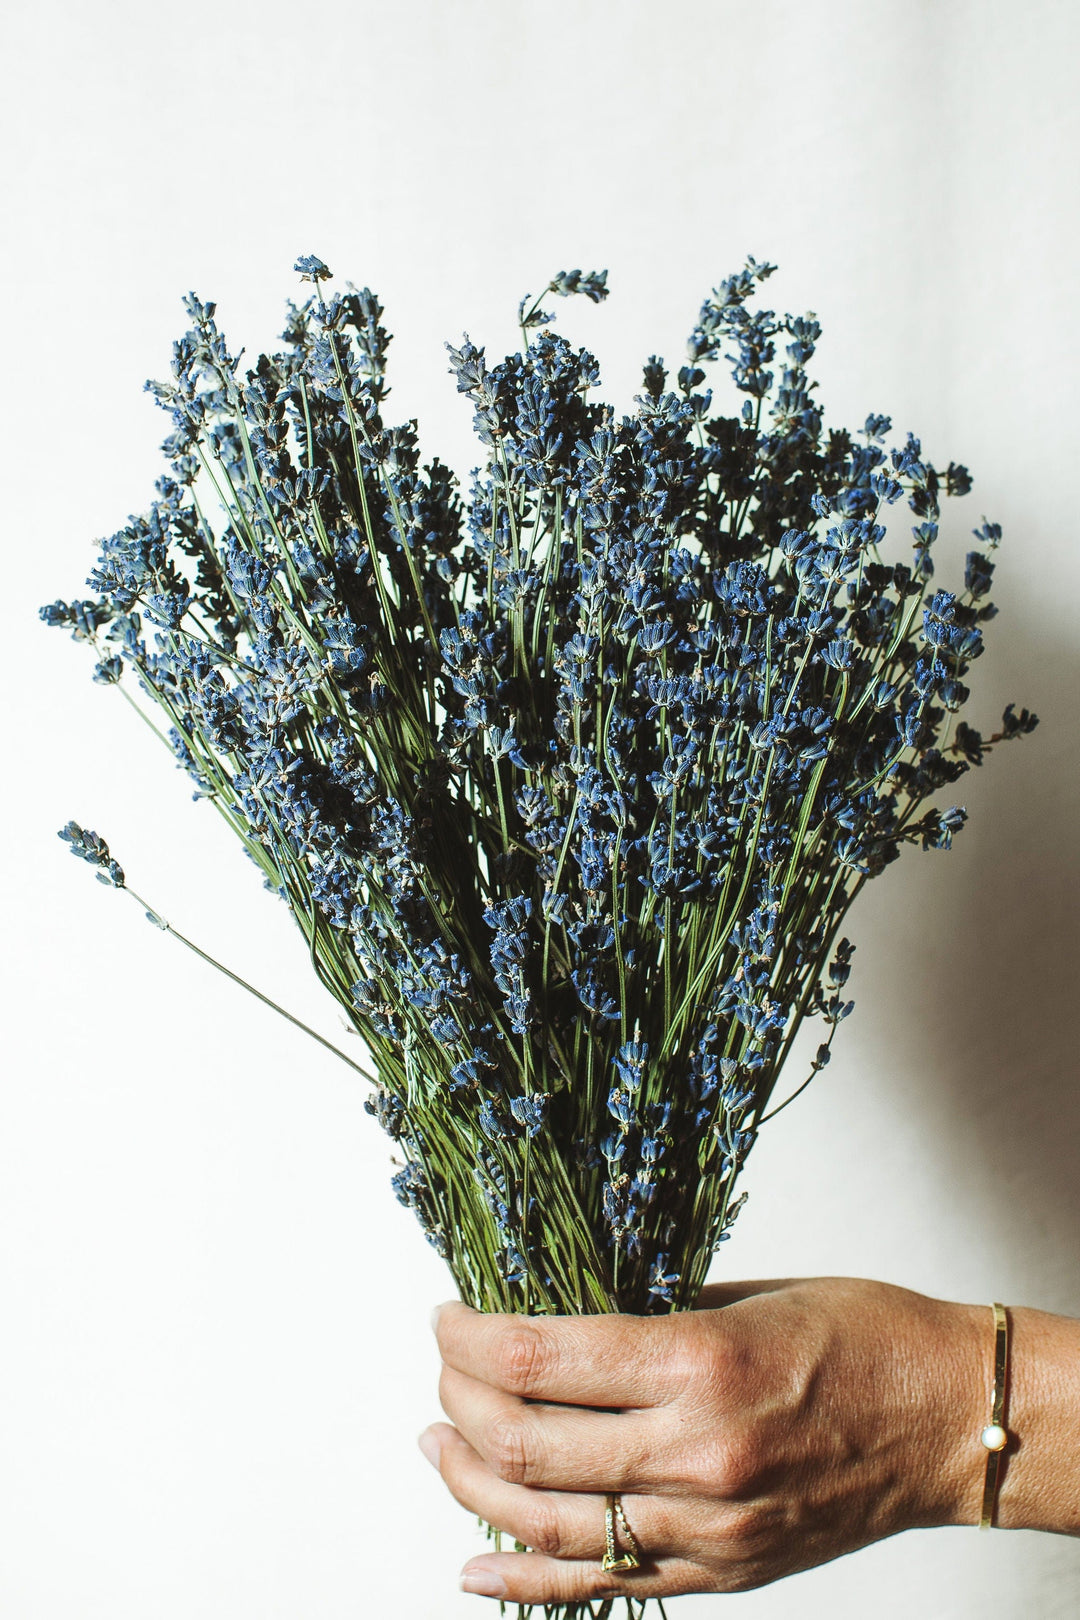 Idlewild Floral Co. Bunches Dried Lavender